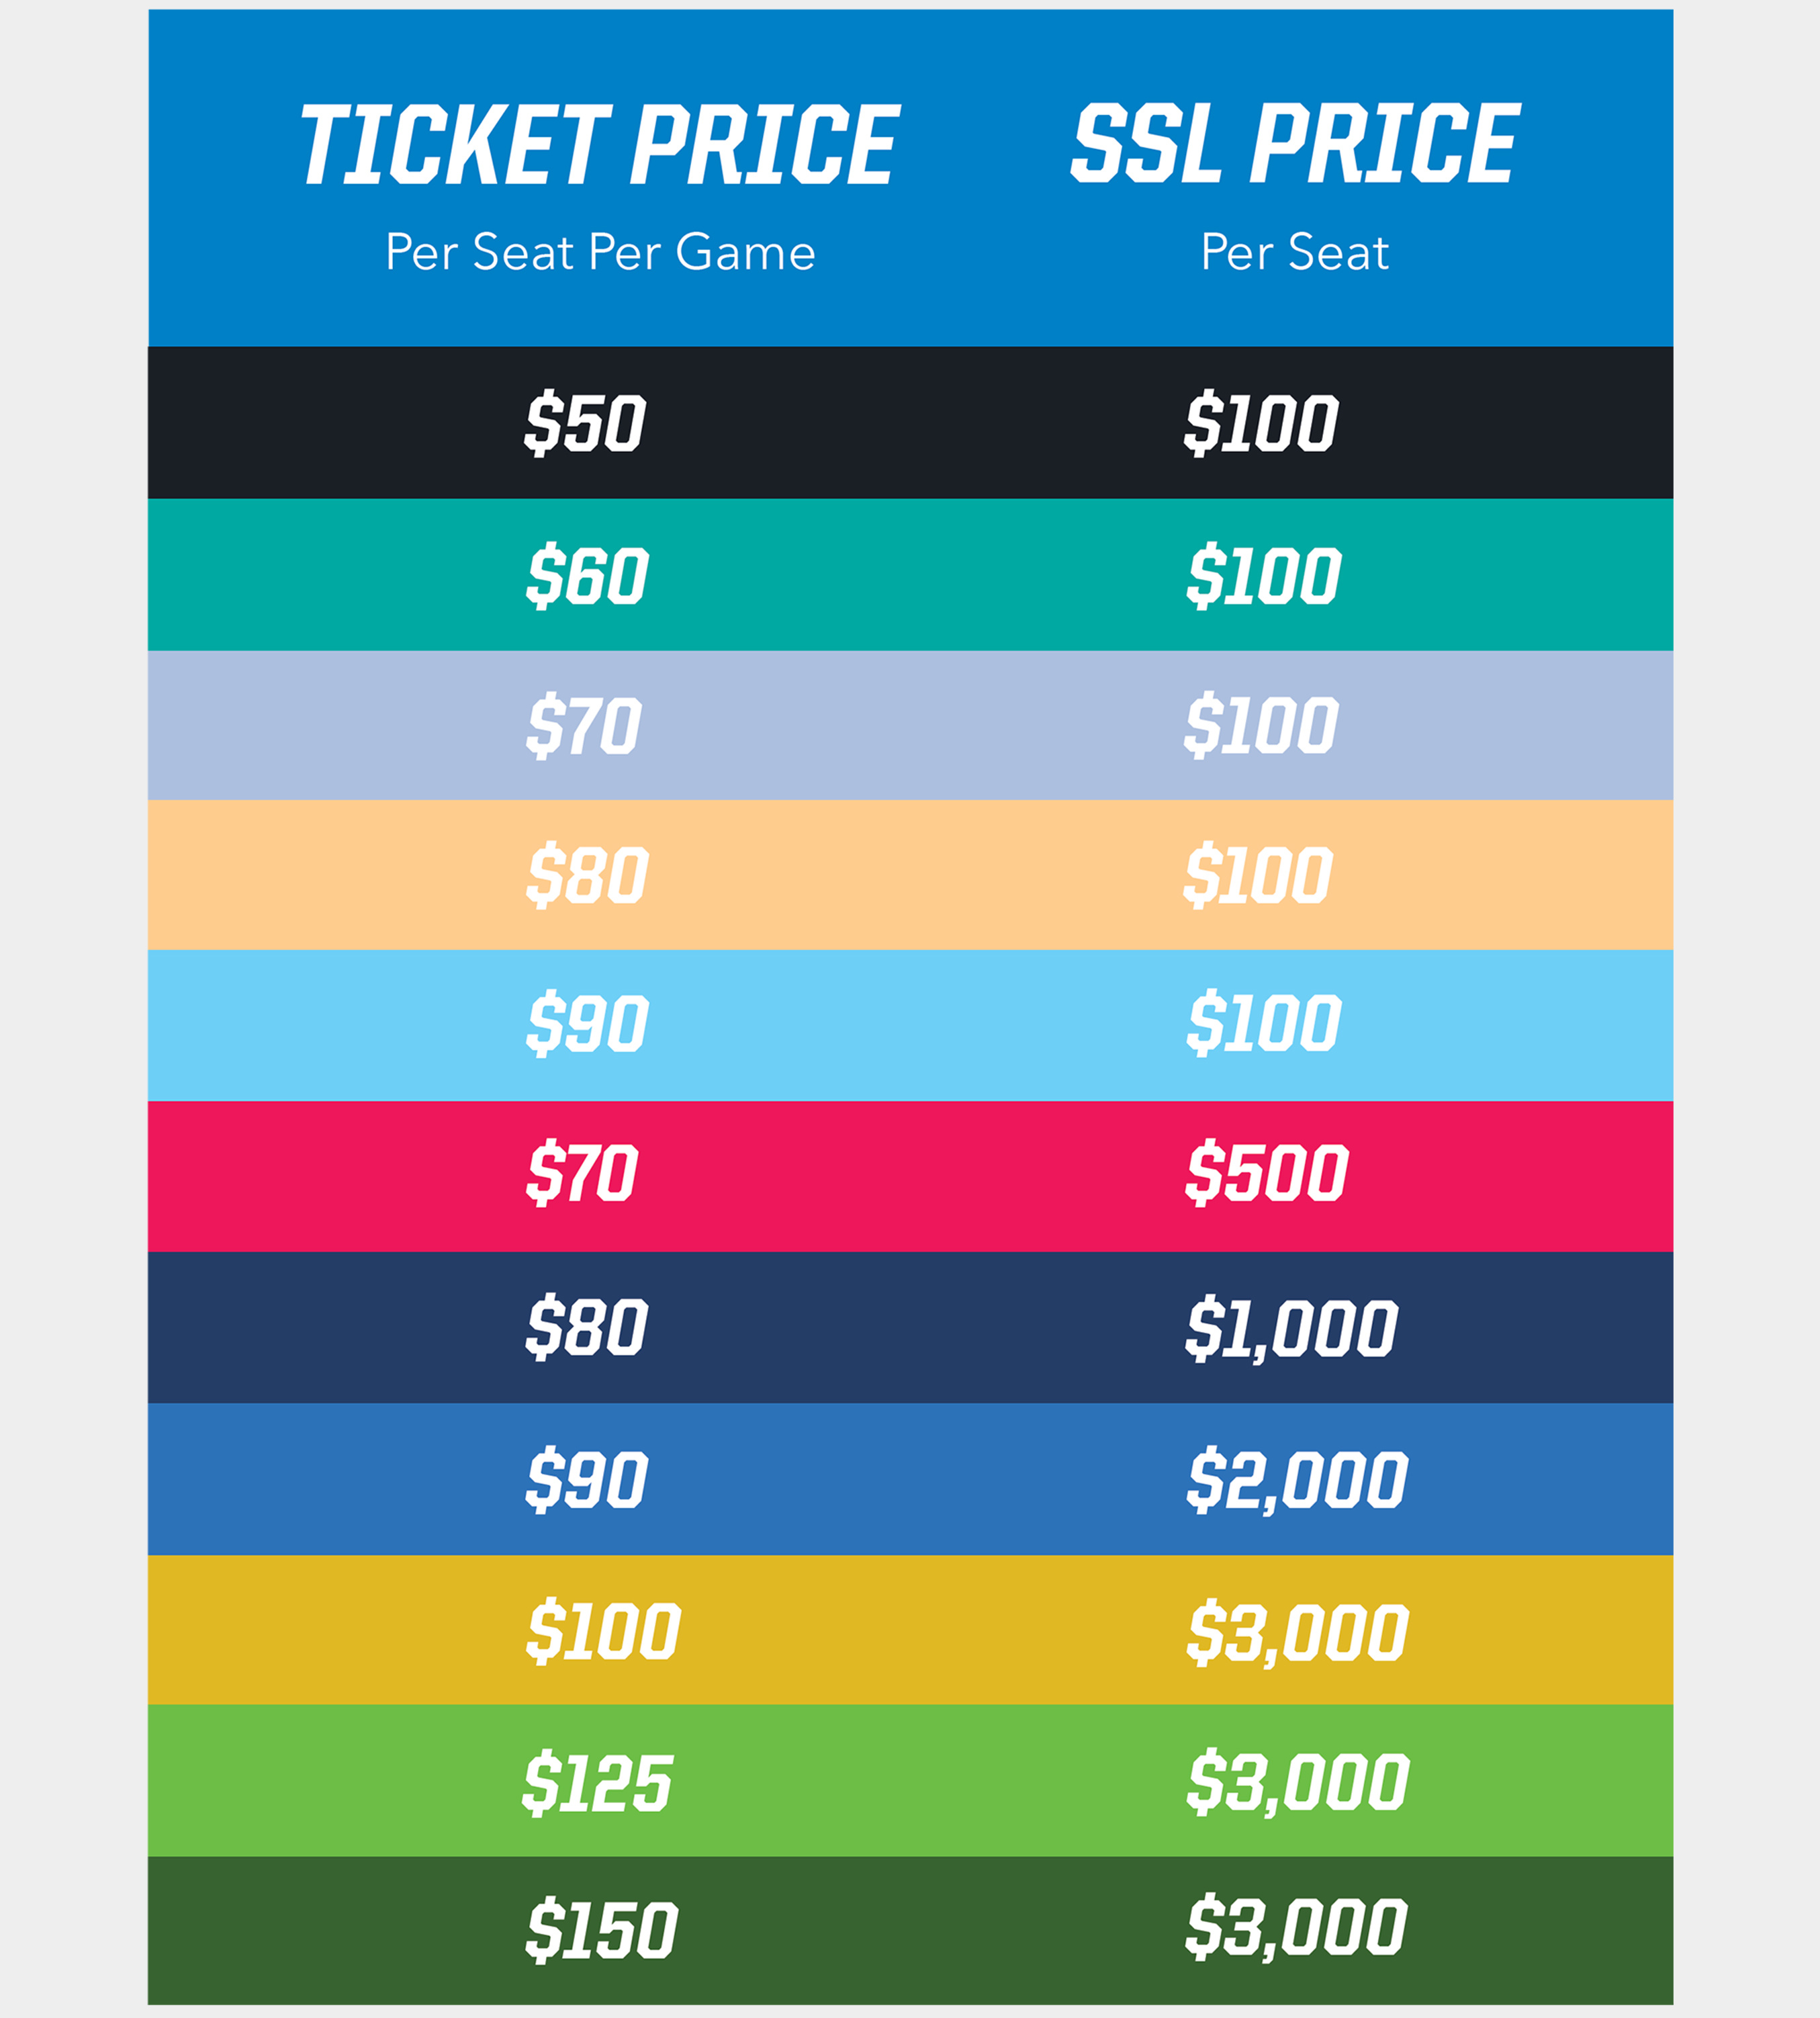 Chargers LA Stadium Pricing | Los Angeles Chargers - chargers.com2710 x 3004